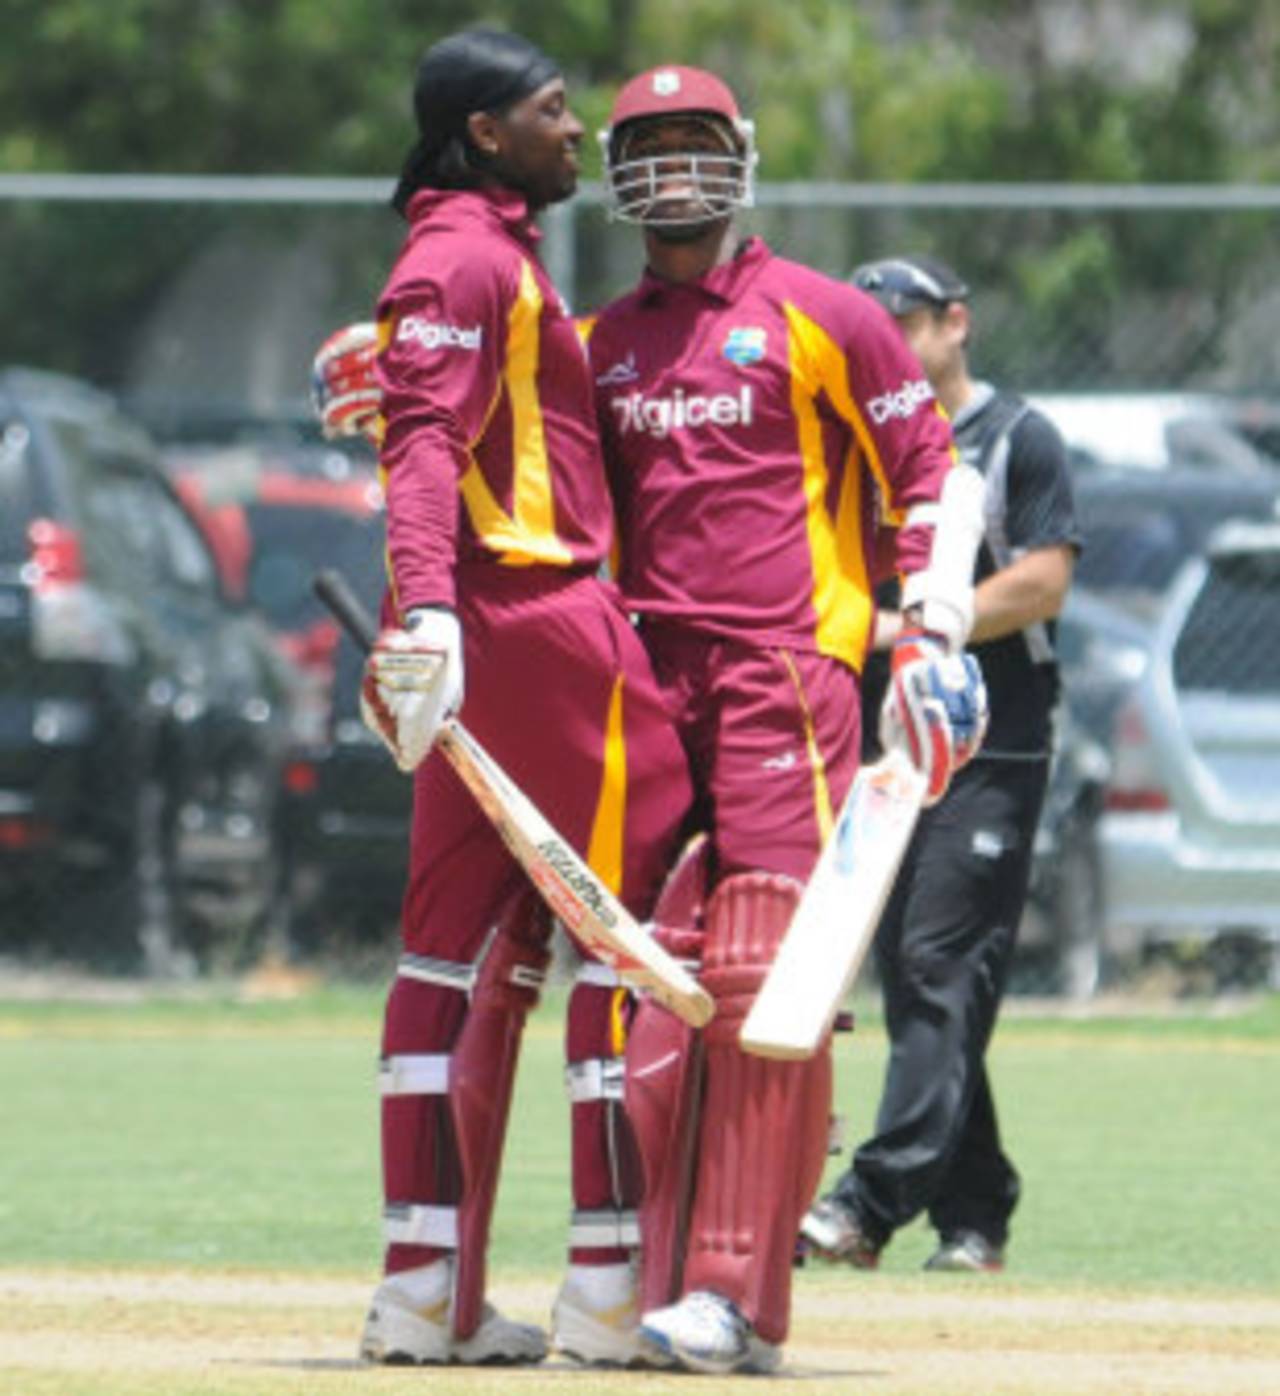 Chris Gayle and Marlon Samuels, the two centurions, West Indies v New Zealand, 2nd ODI, Kingston, July 7, 2012